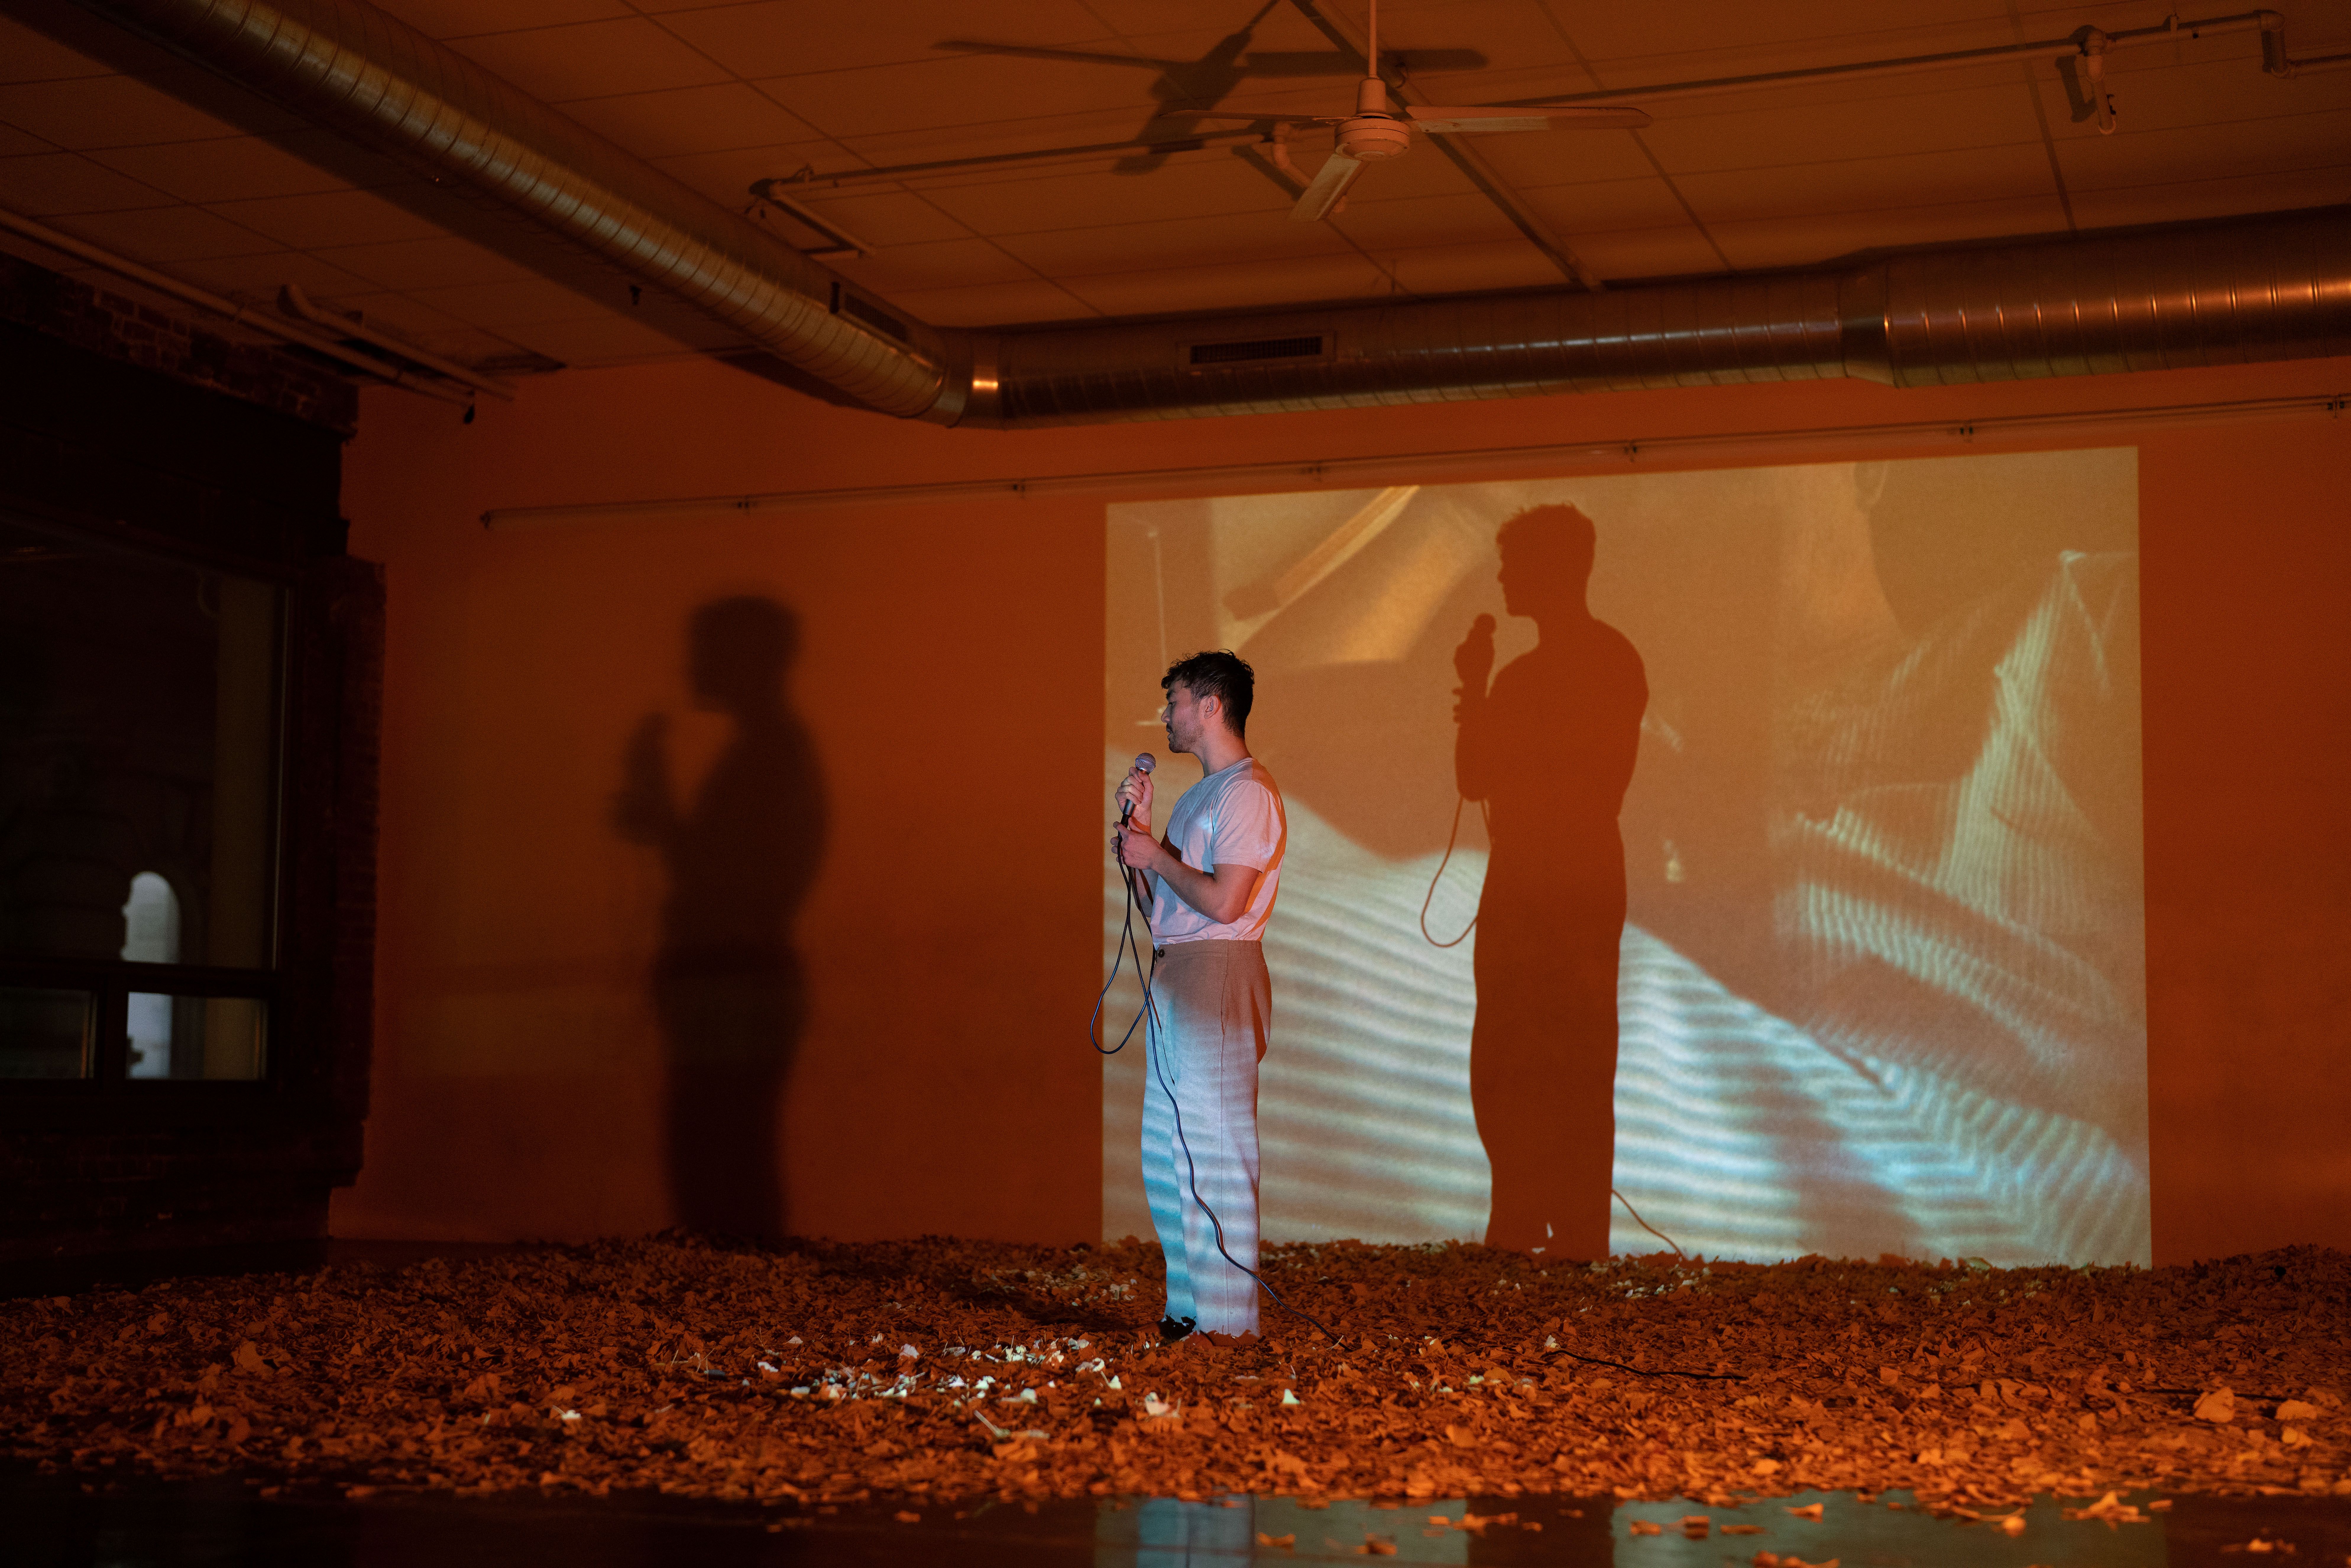 Image of Jason Vu performing in their work "through noise", with abstract projections and gingko leaves covering the floor